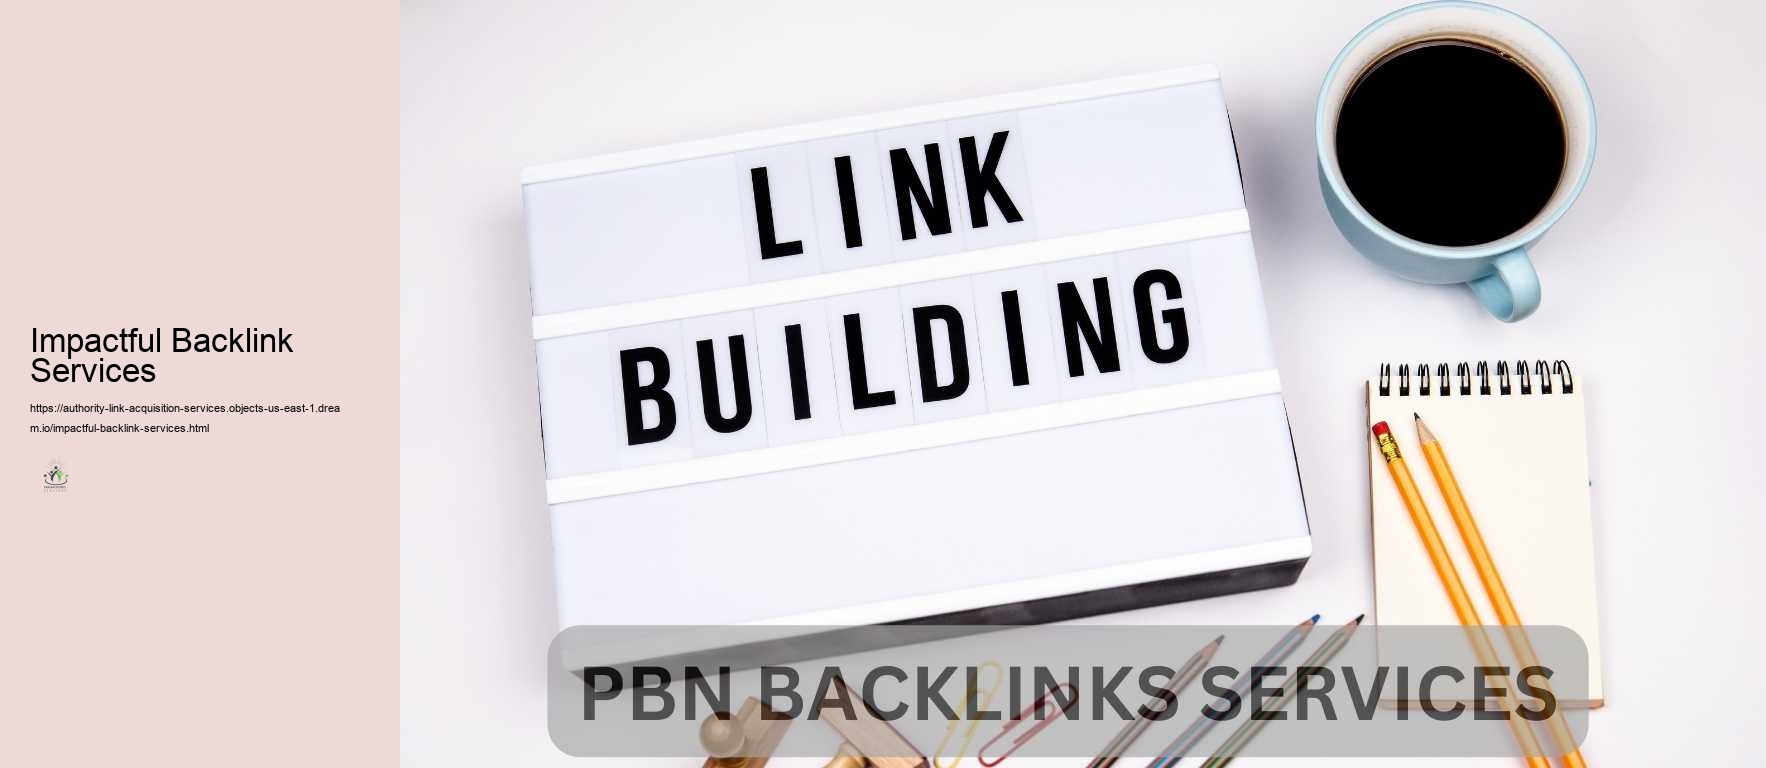 Impactful Backlink Services